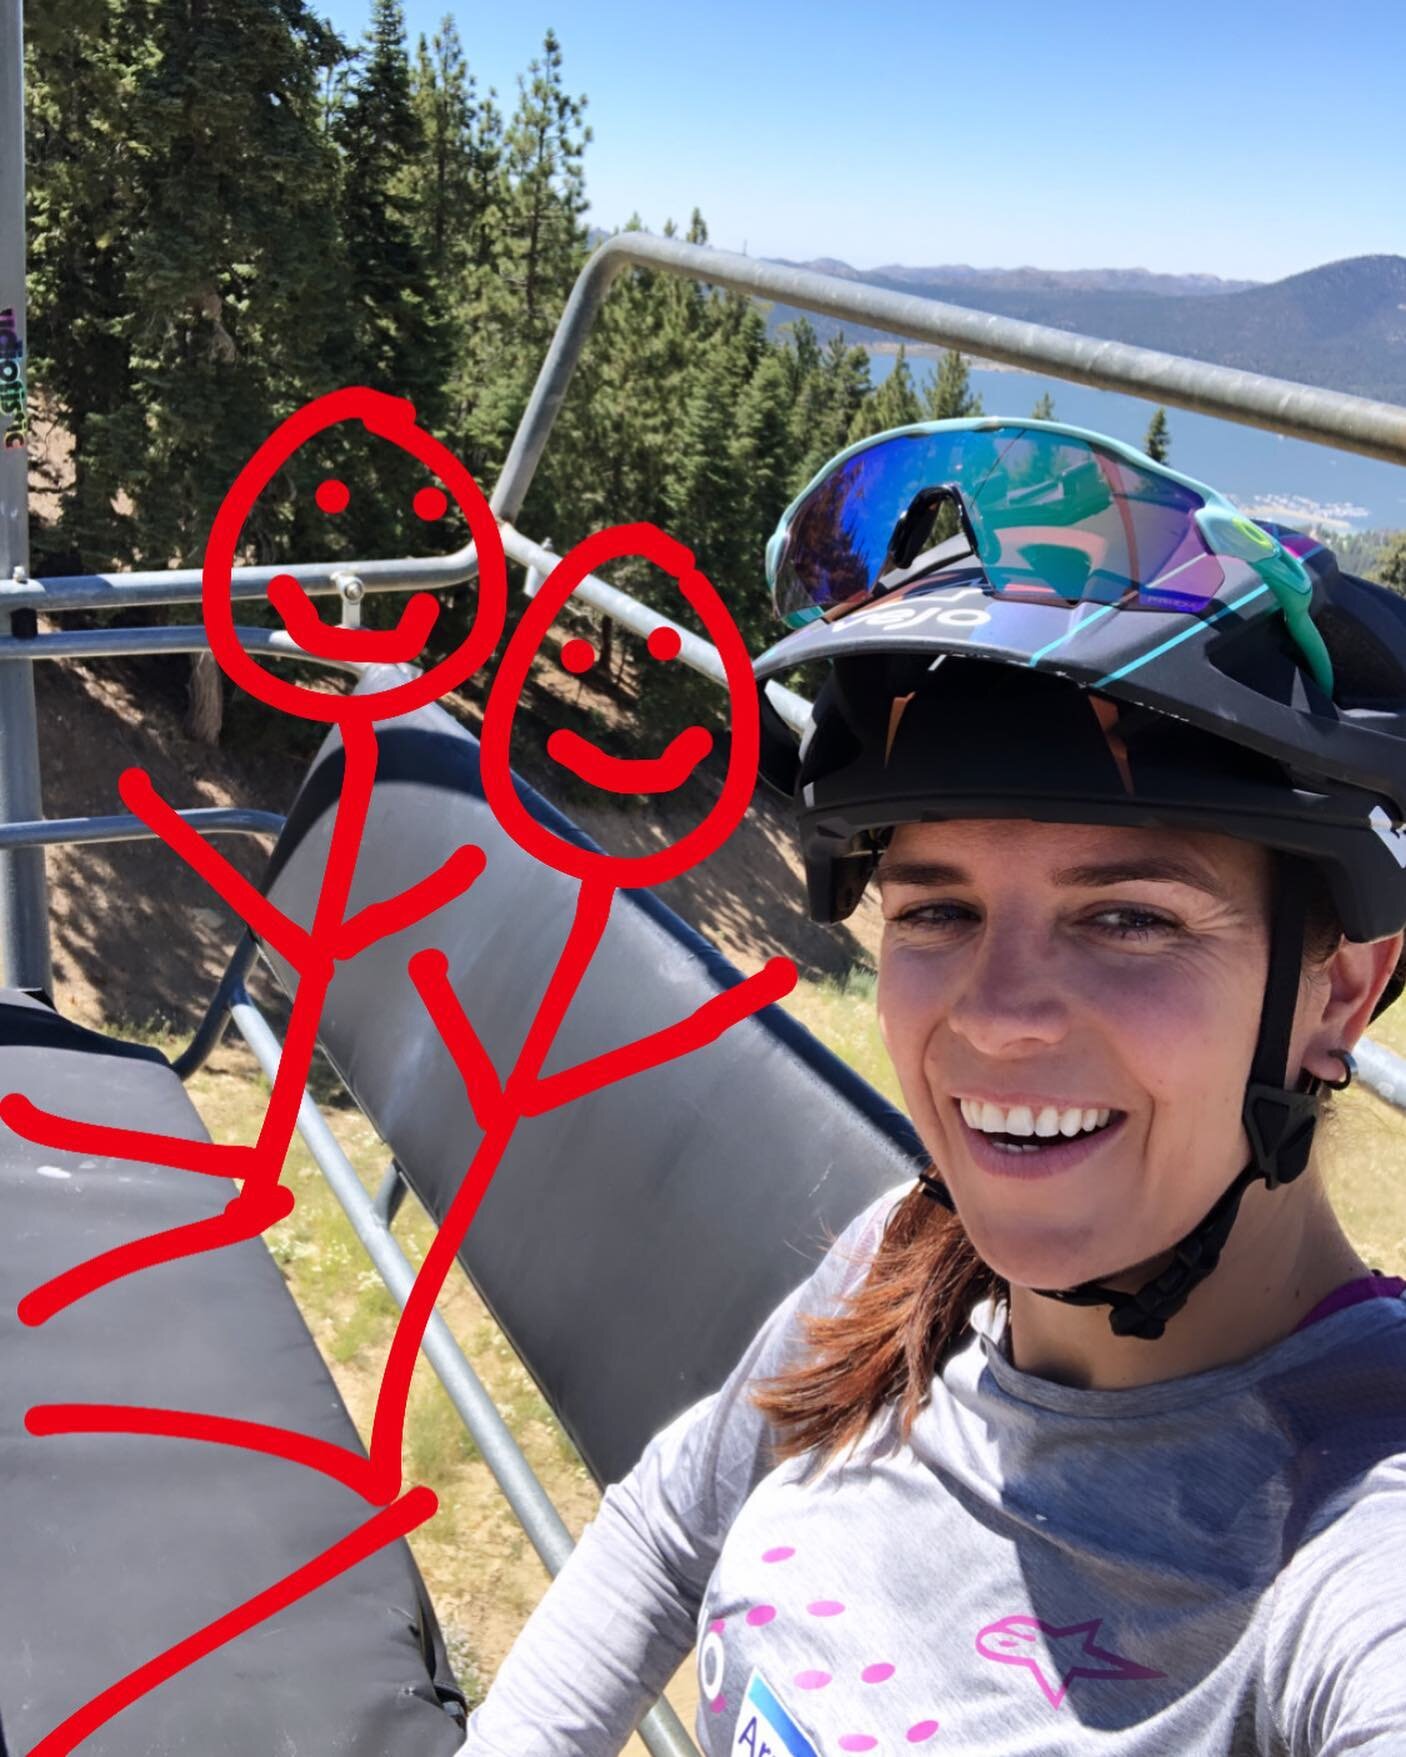 Chairlift selfie with friends, summer 2020 :) #Covid19 #SocialDistancing #NailedIt